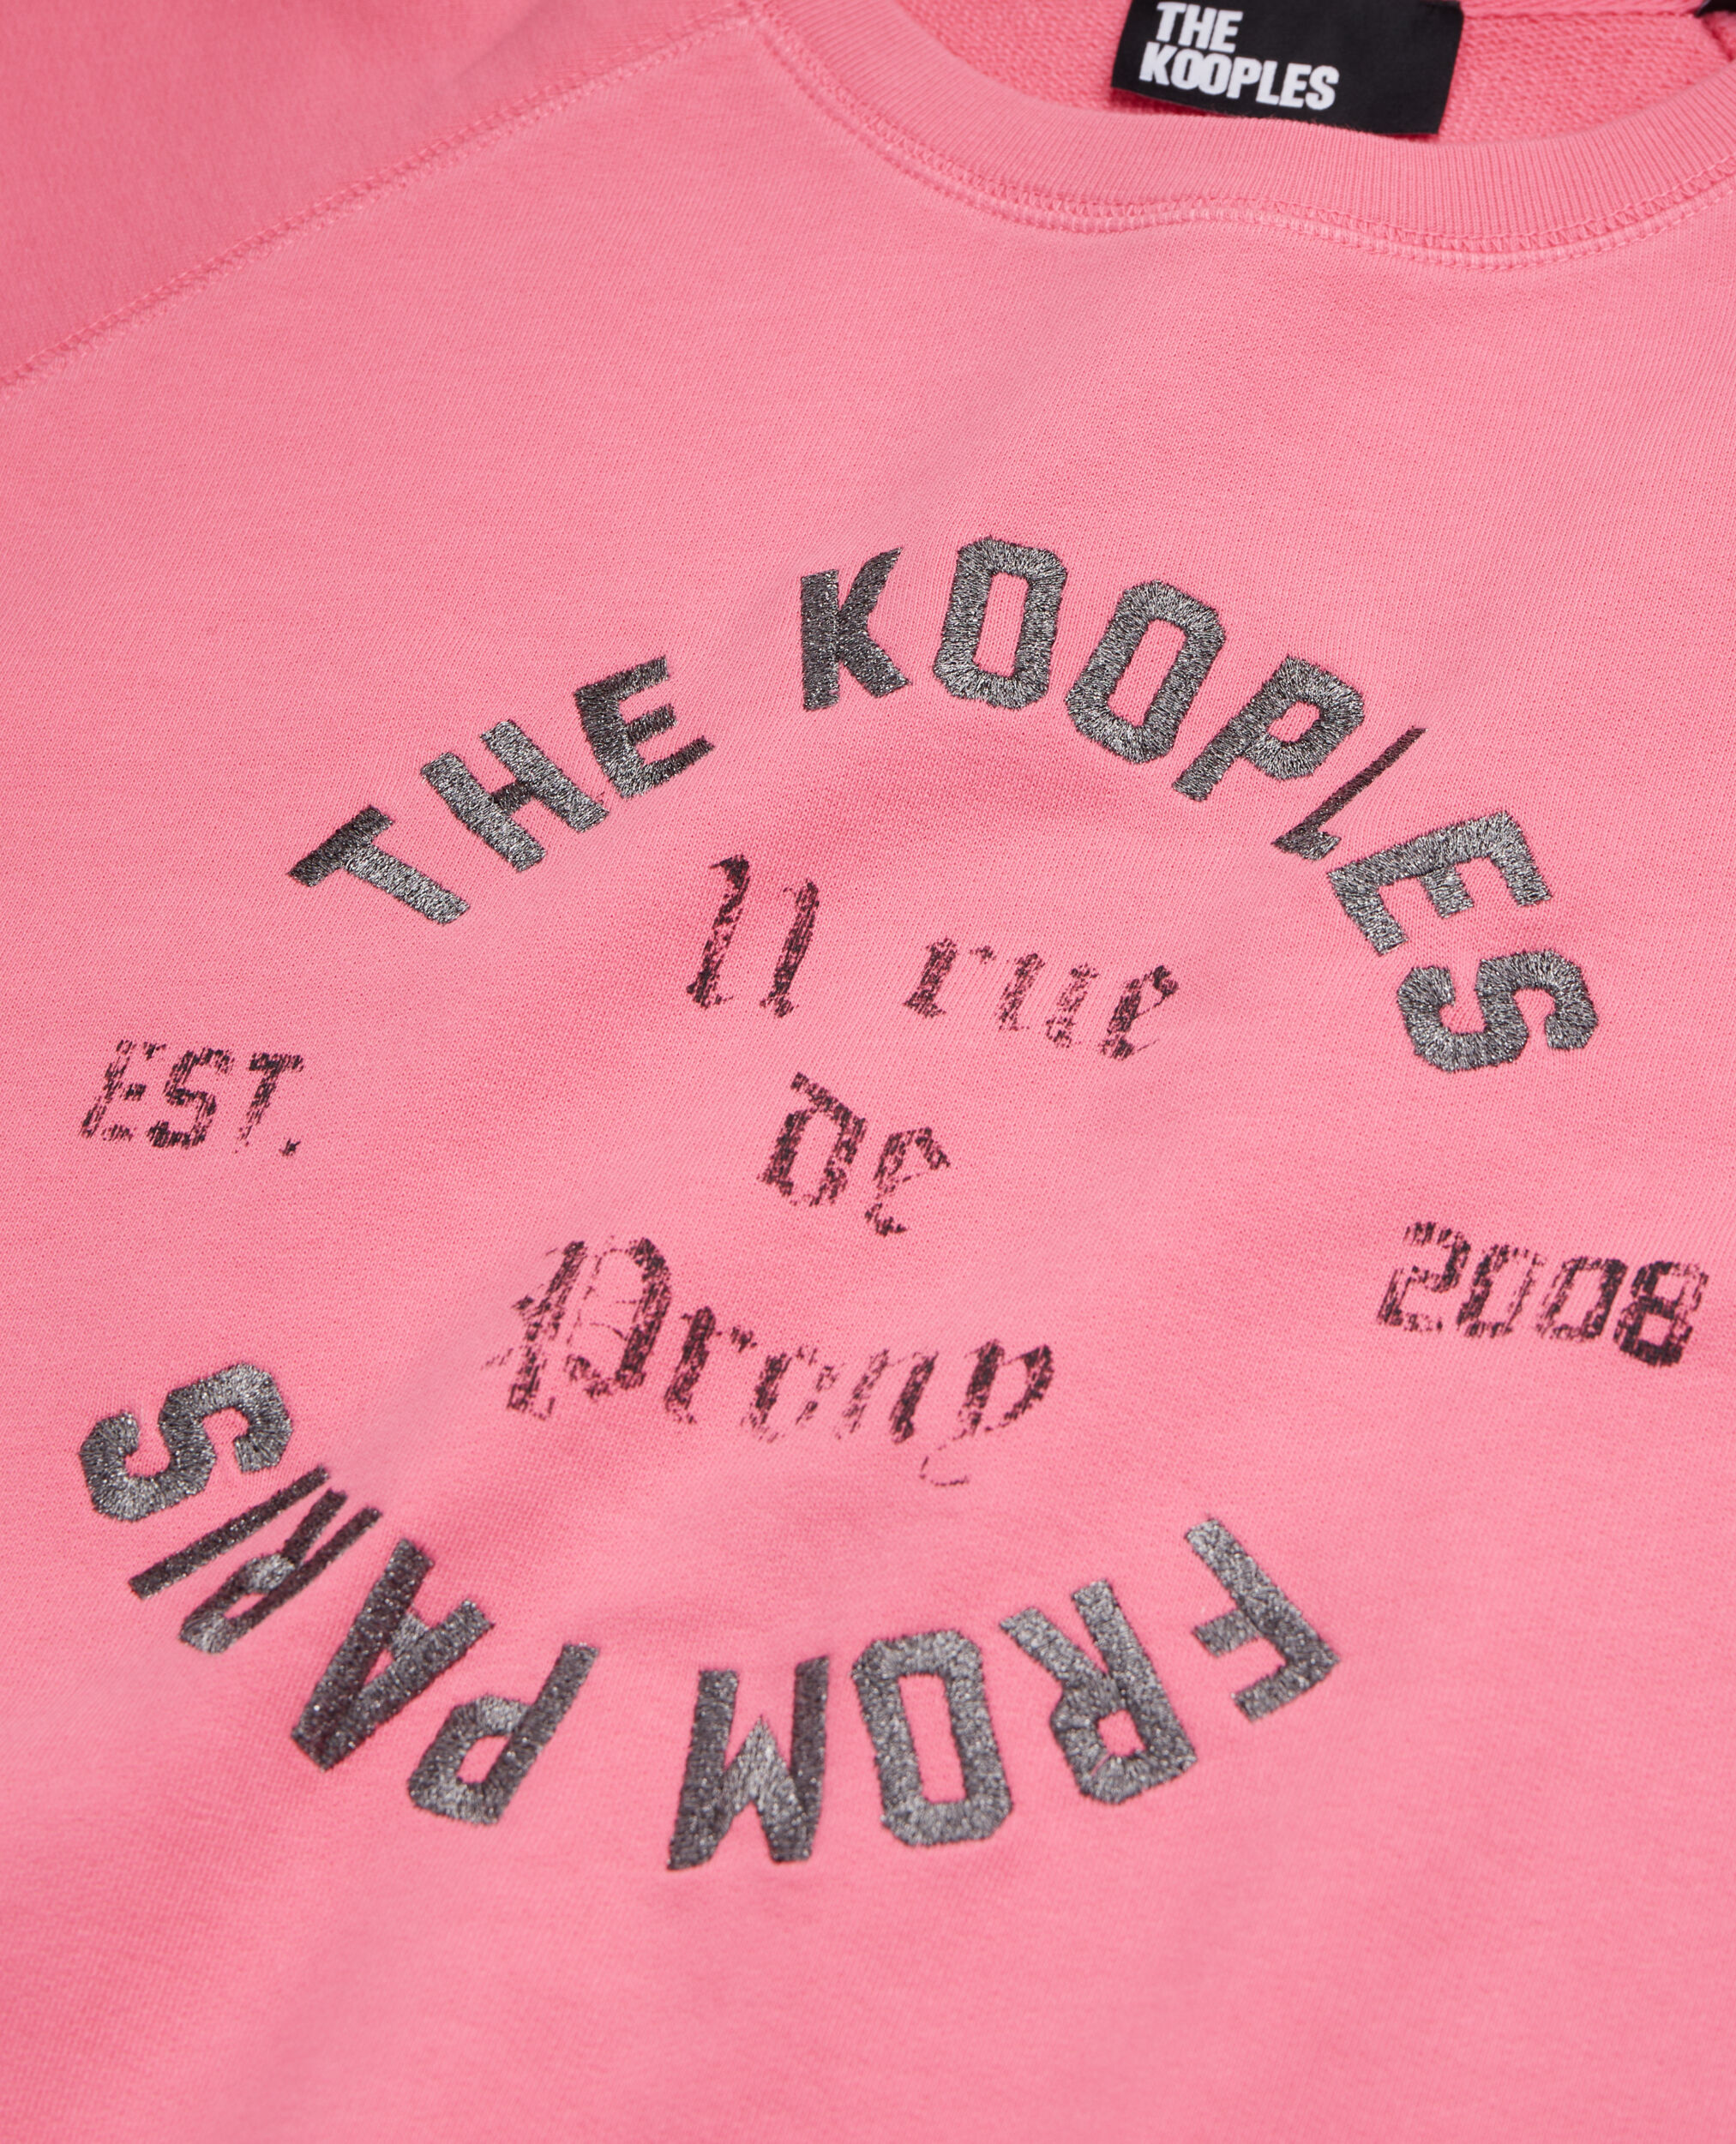 Pink sweatshirt with 11 Rue de Prony serigraphy, OLD PINK, hi-res image number null